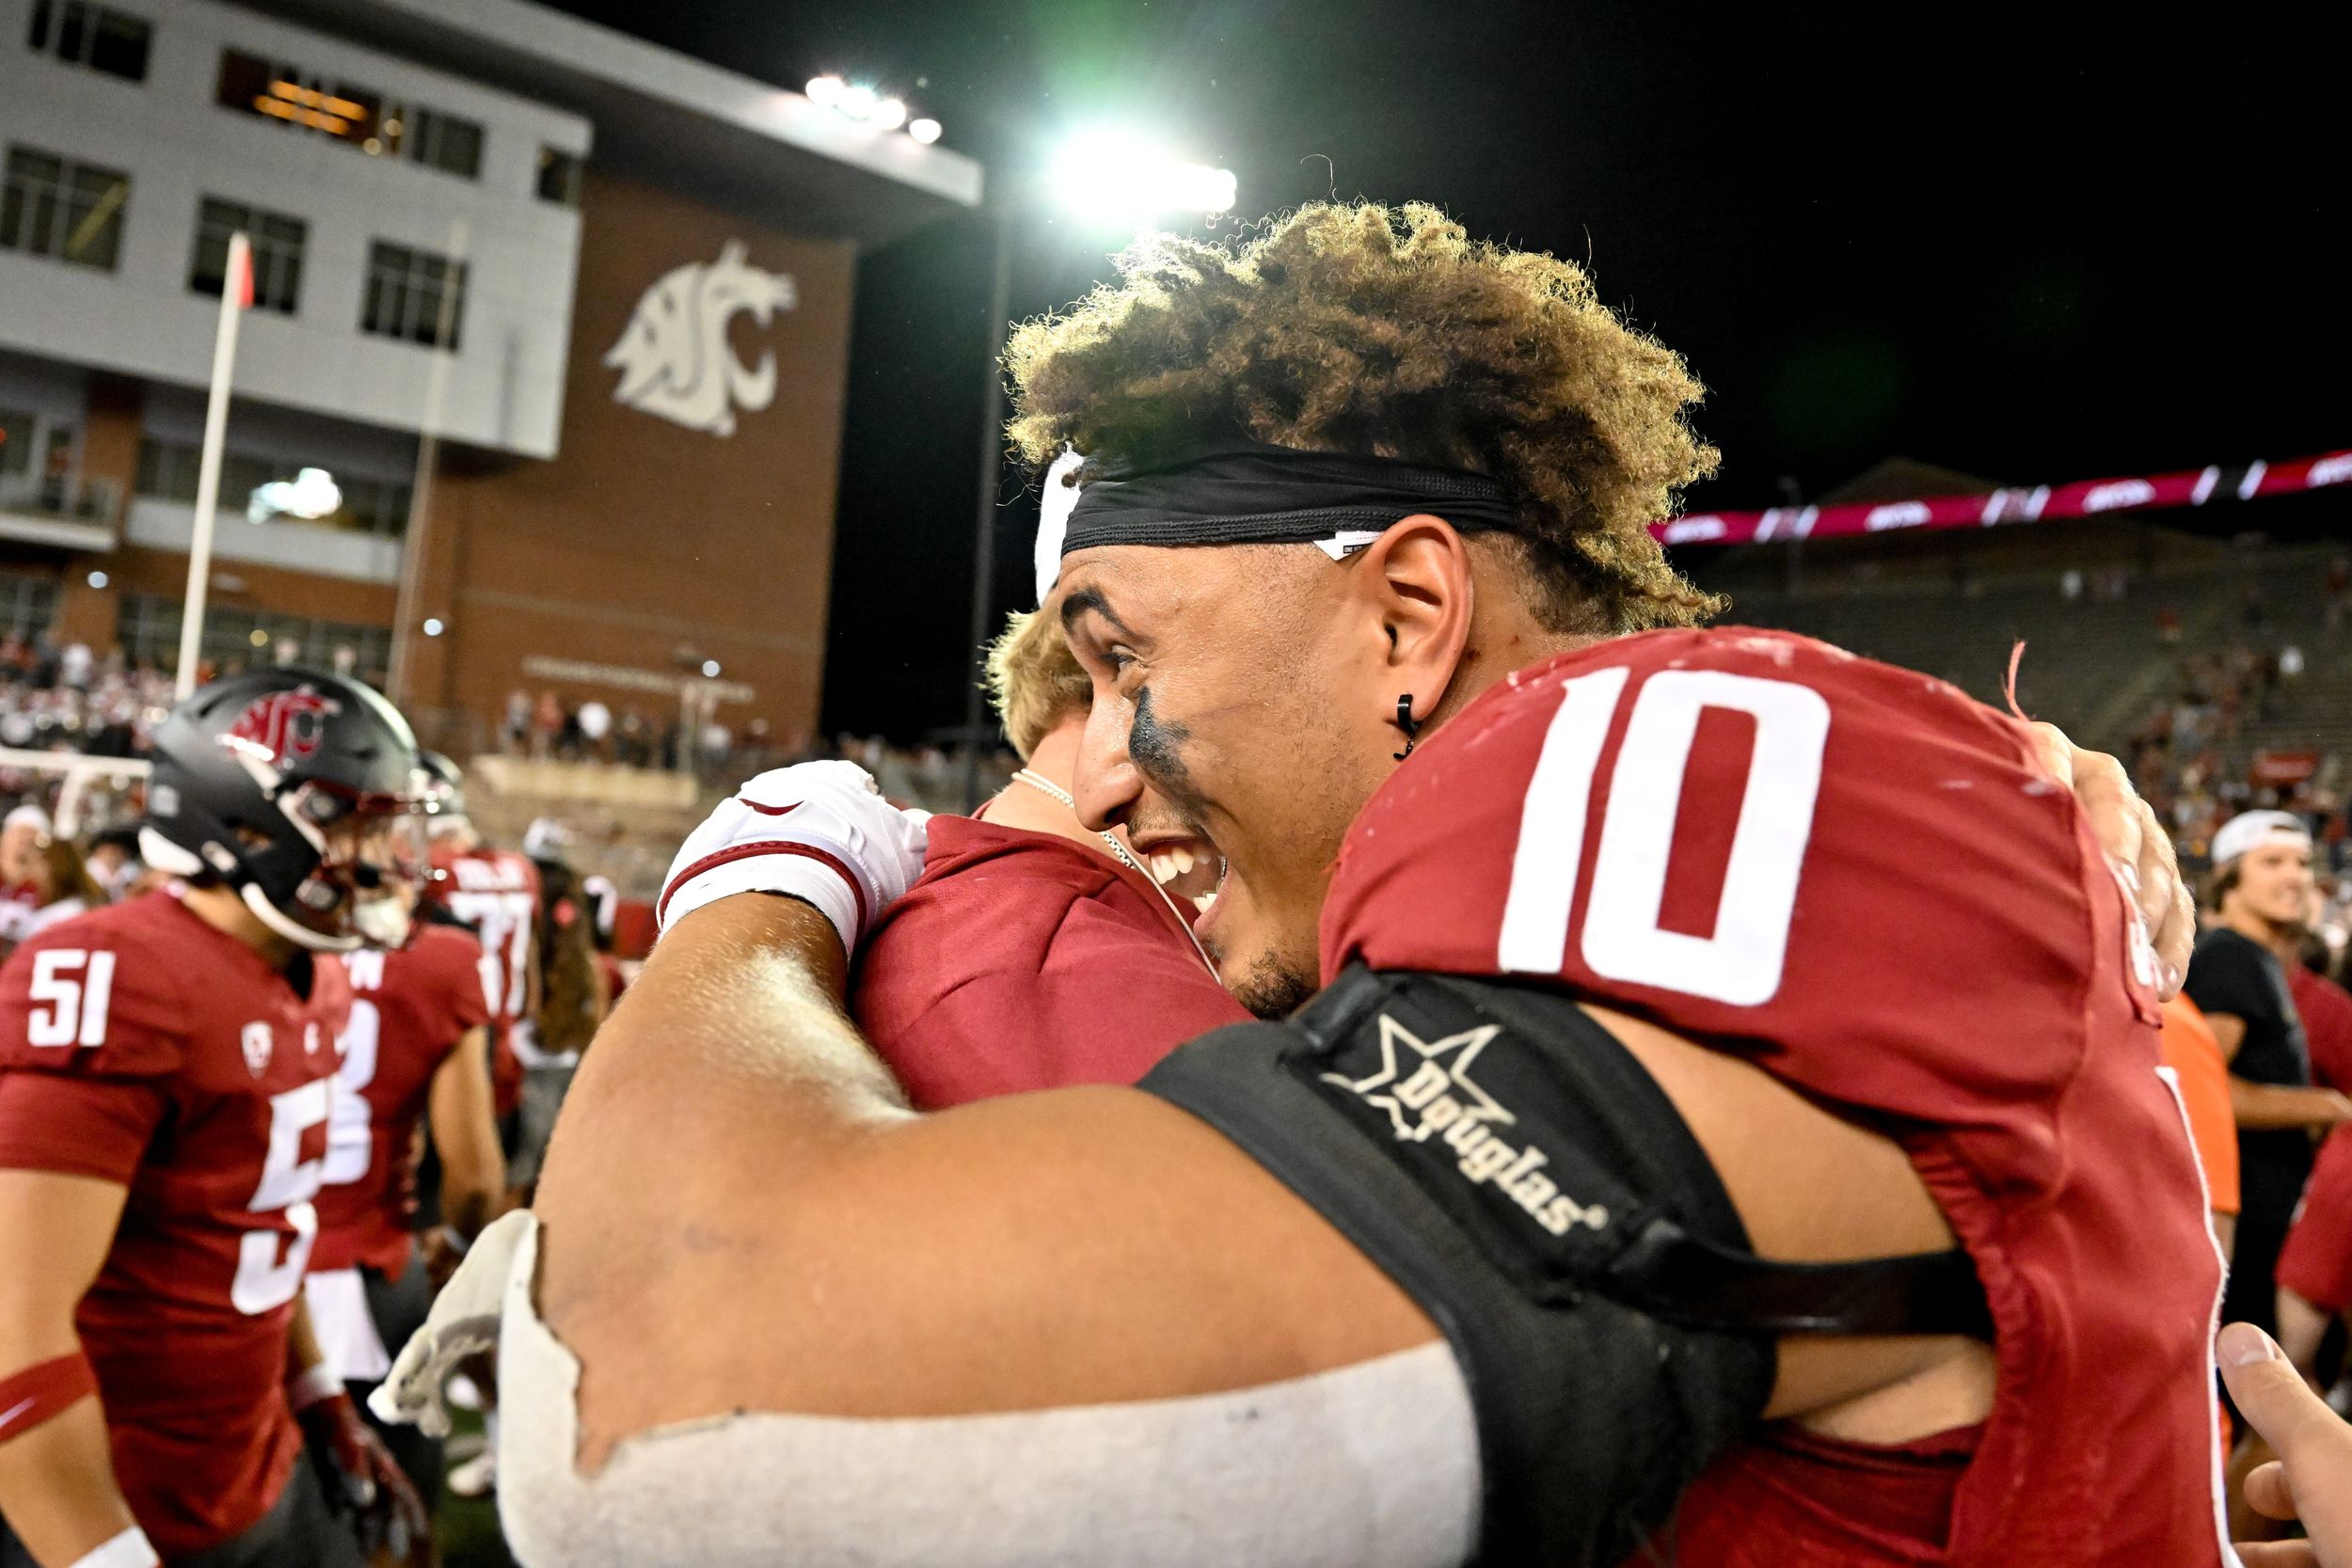 Ron Stone Jr Turned Down Nil Offers To Stay At Wsu Can Cougs Recruit — And Retain — More Like